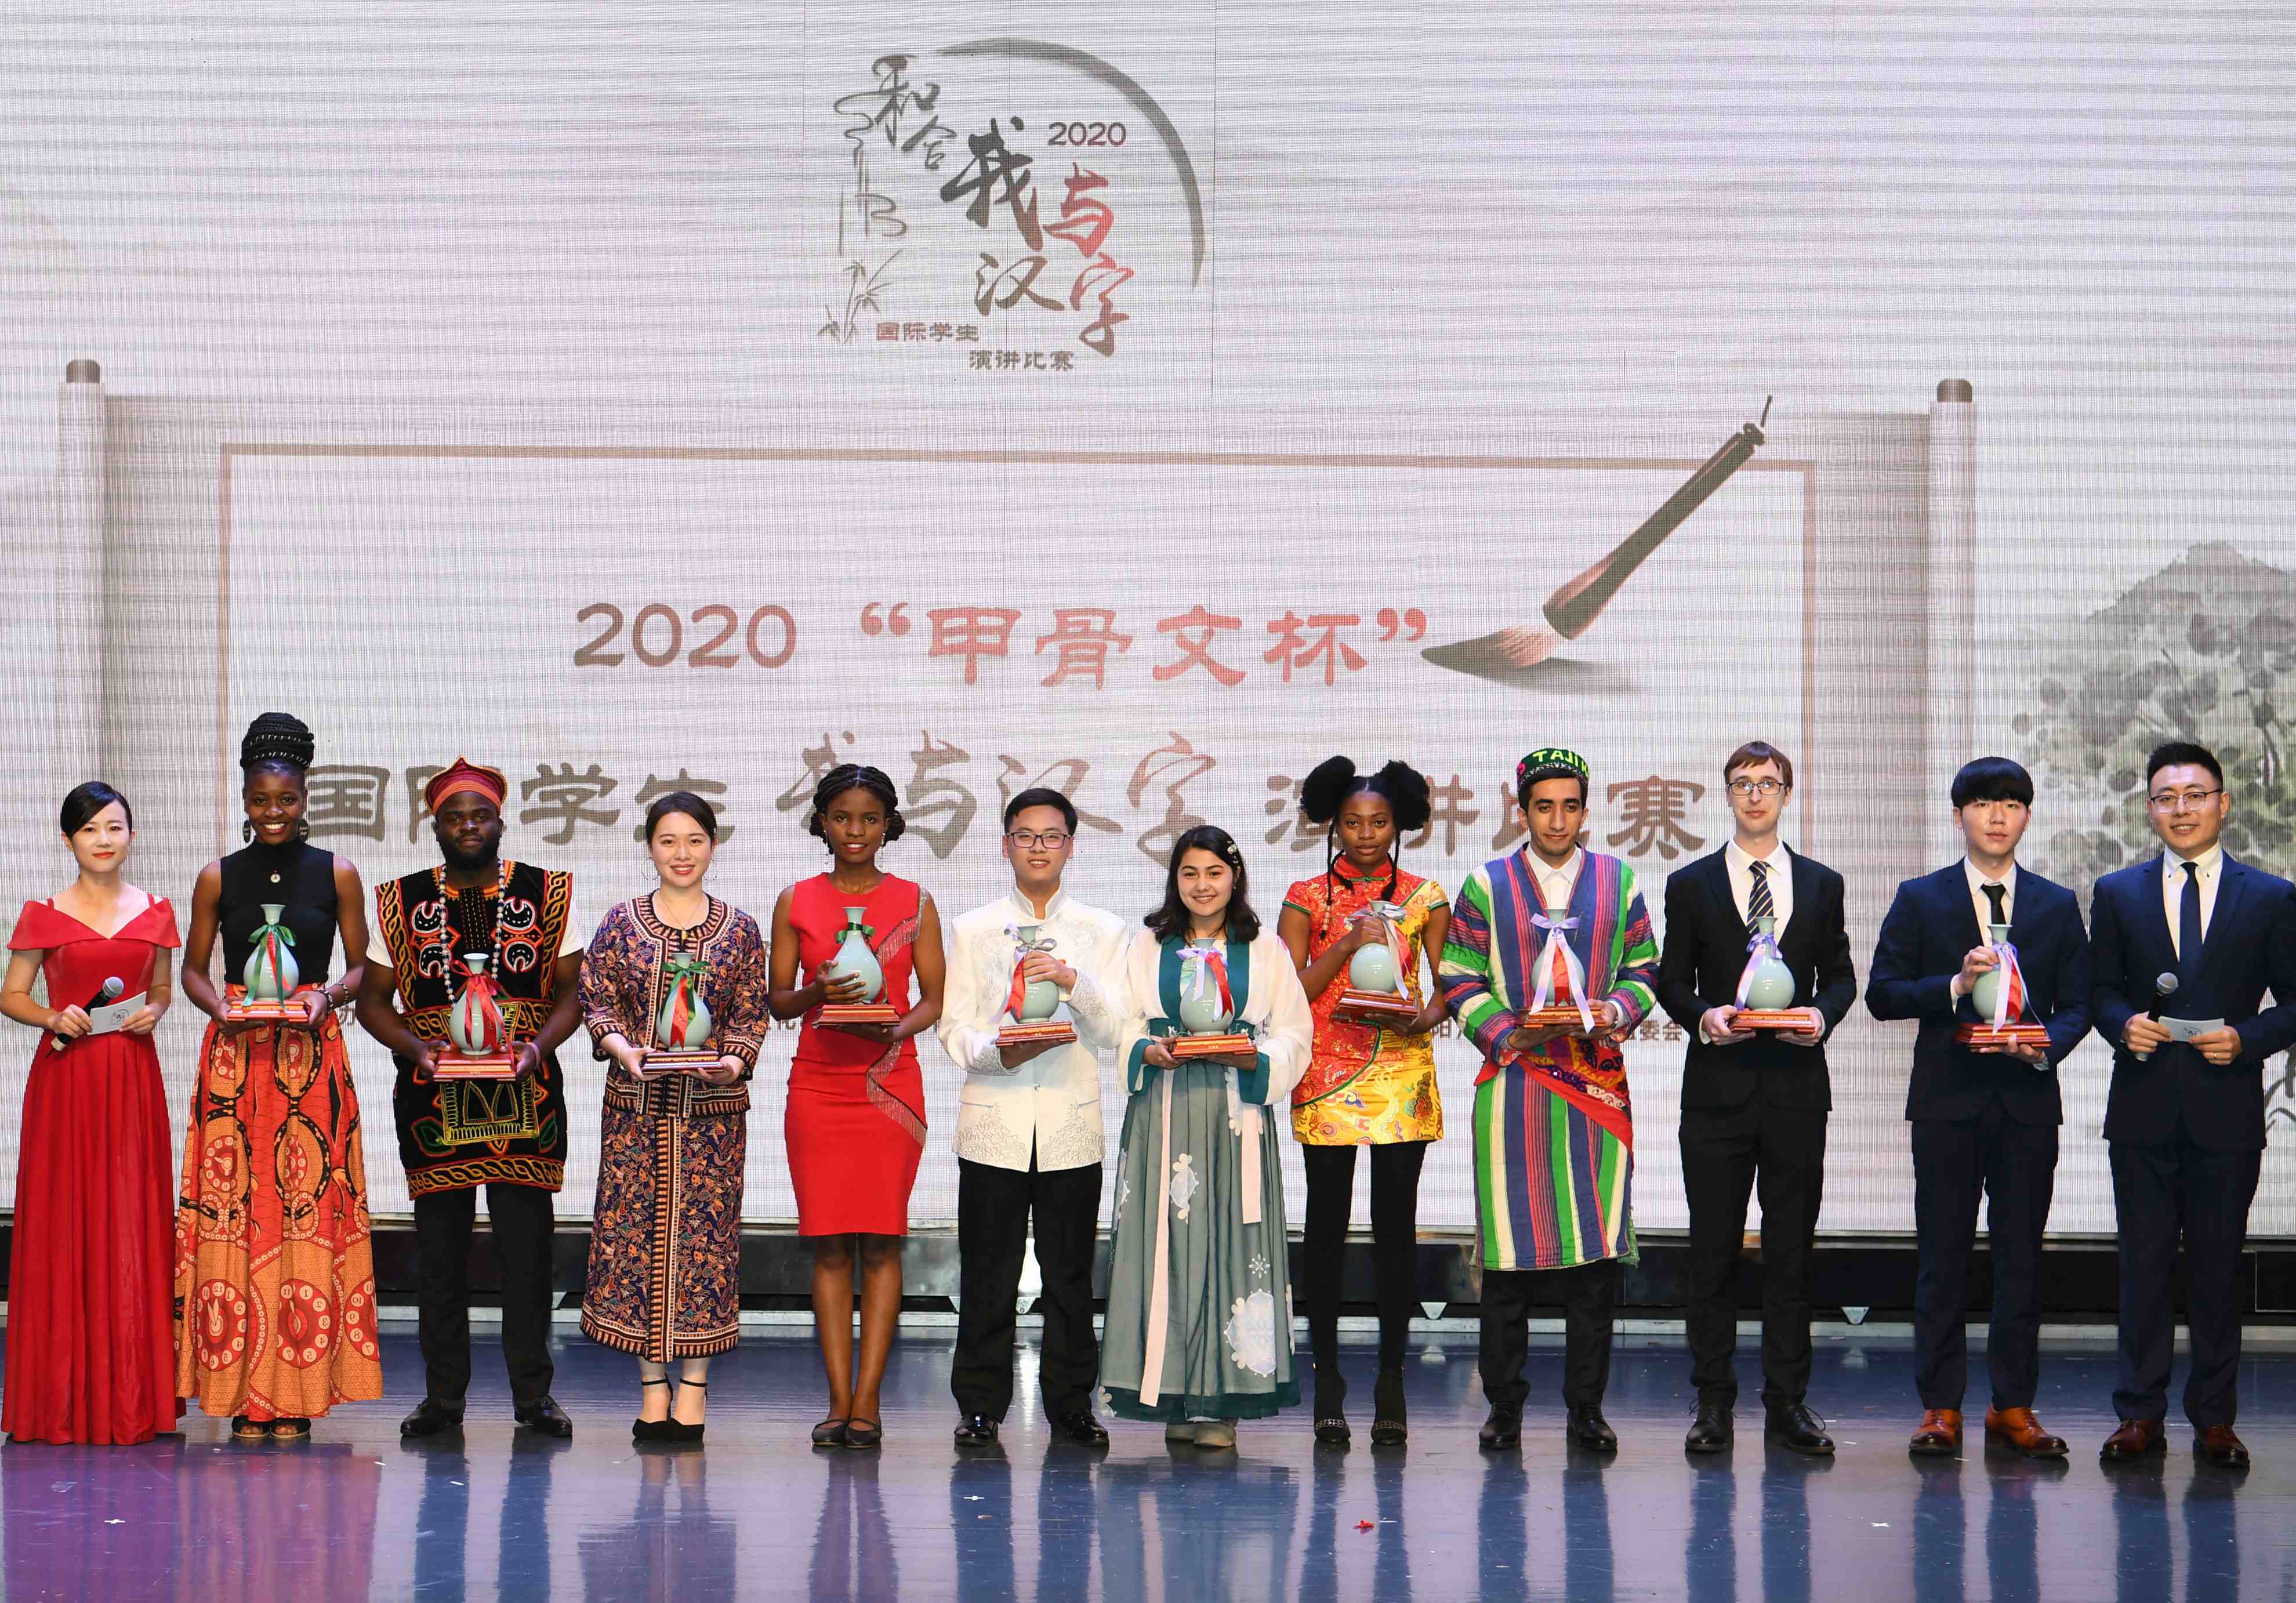 2020 Oracle Bone Inscriptions Cup “Chinese Characters and Me” Speech Contest concludes